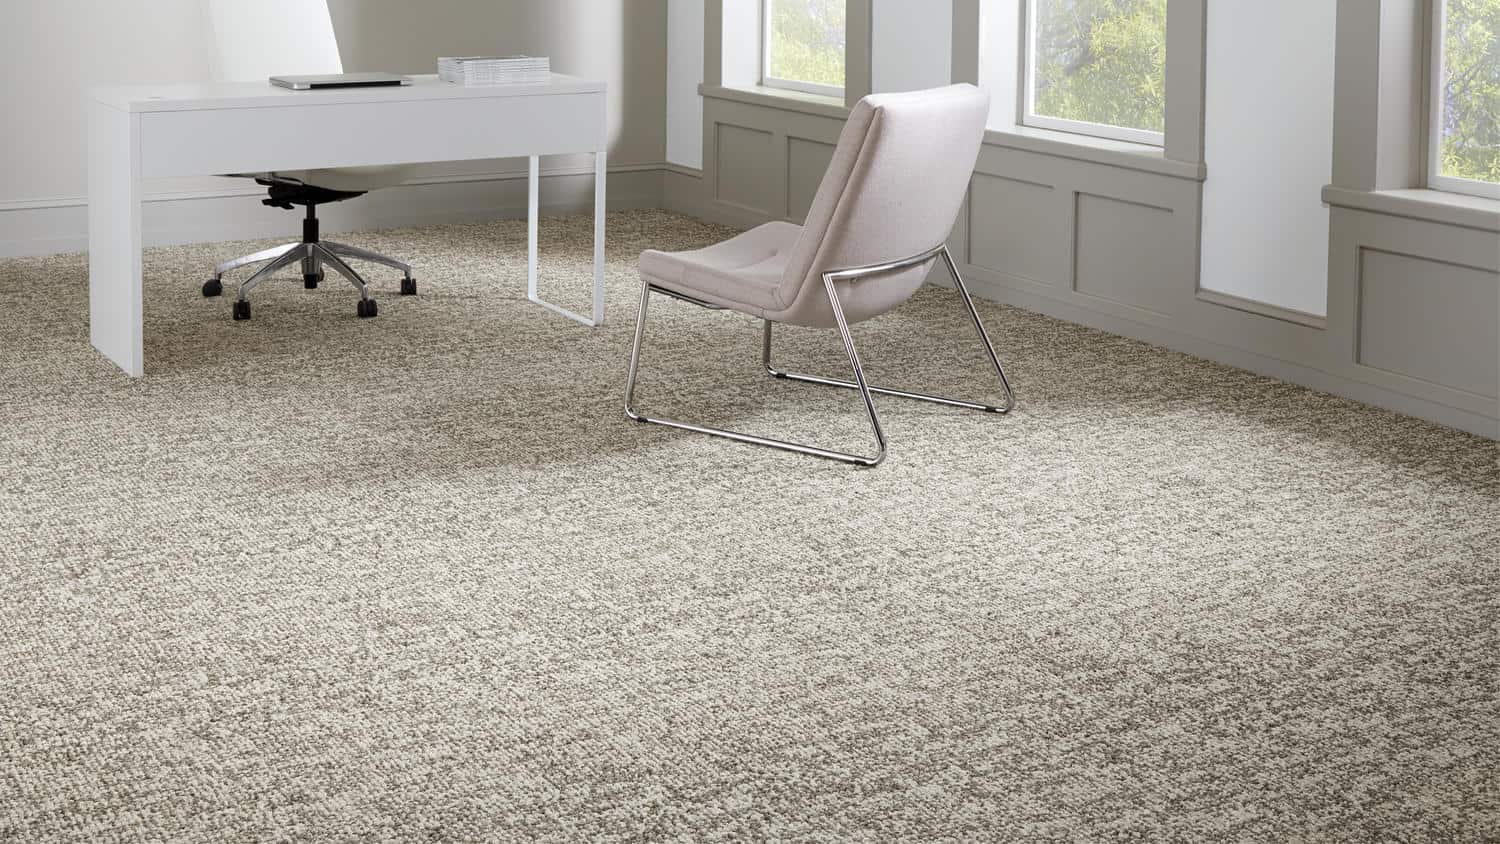 Four Tips for Tackling a Troubled Carpet